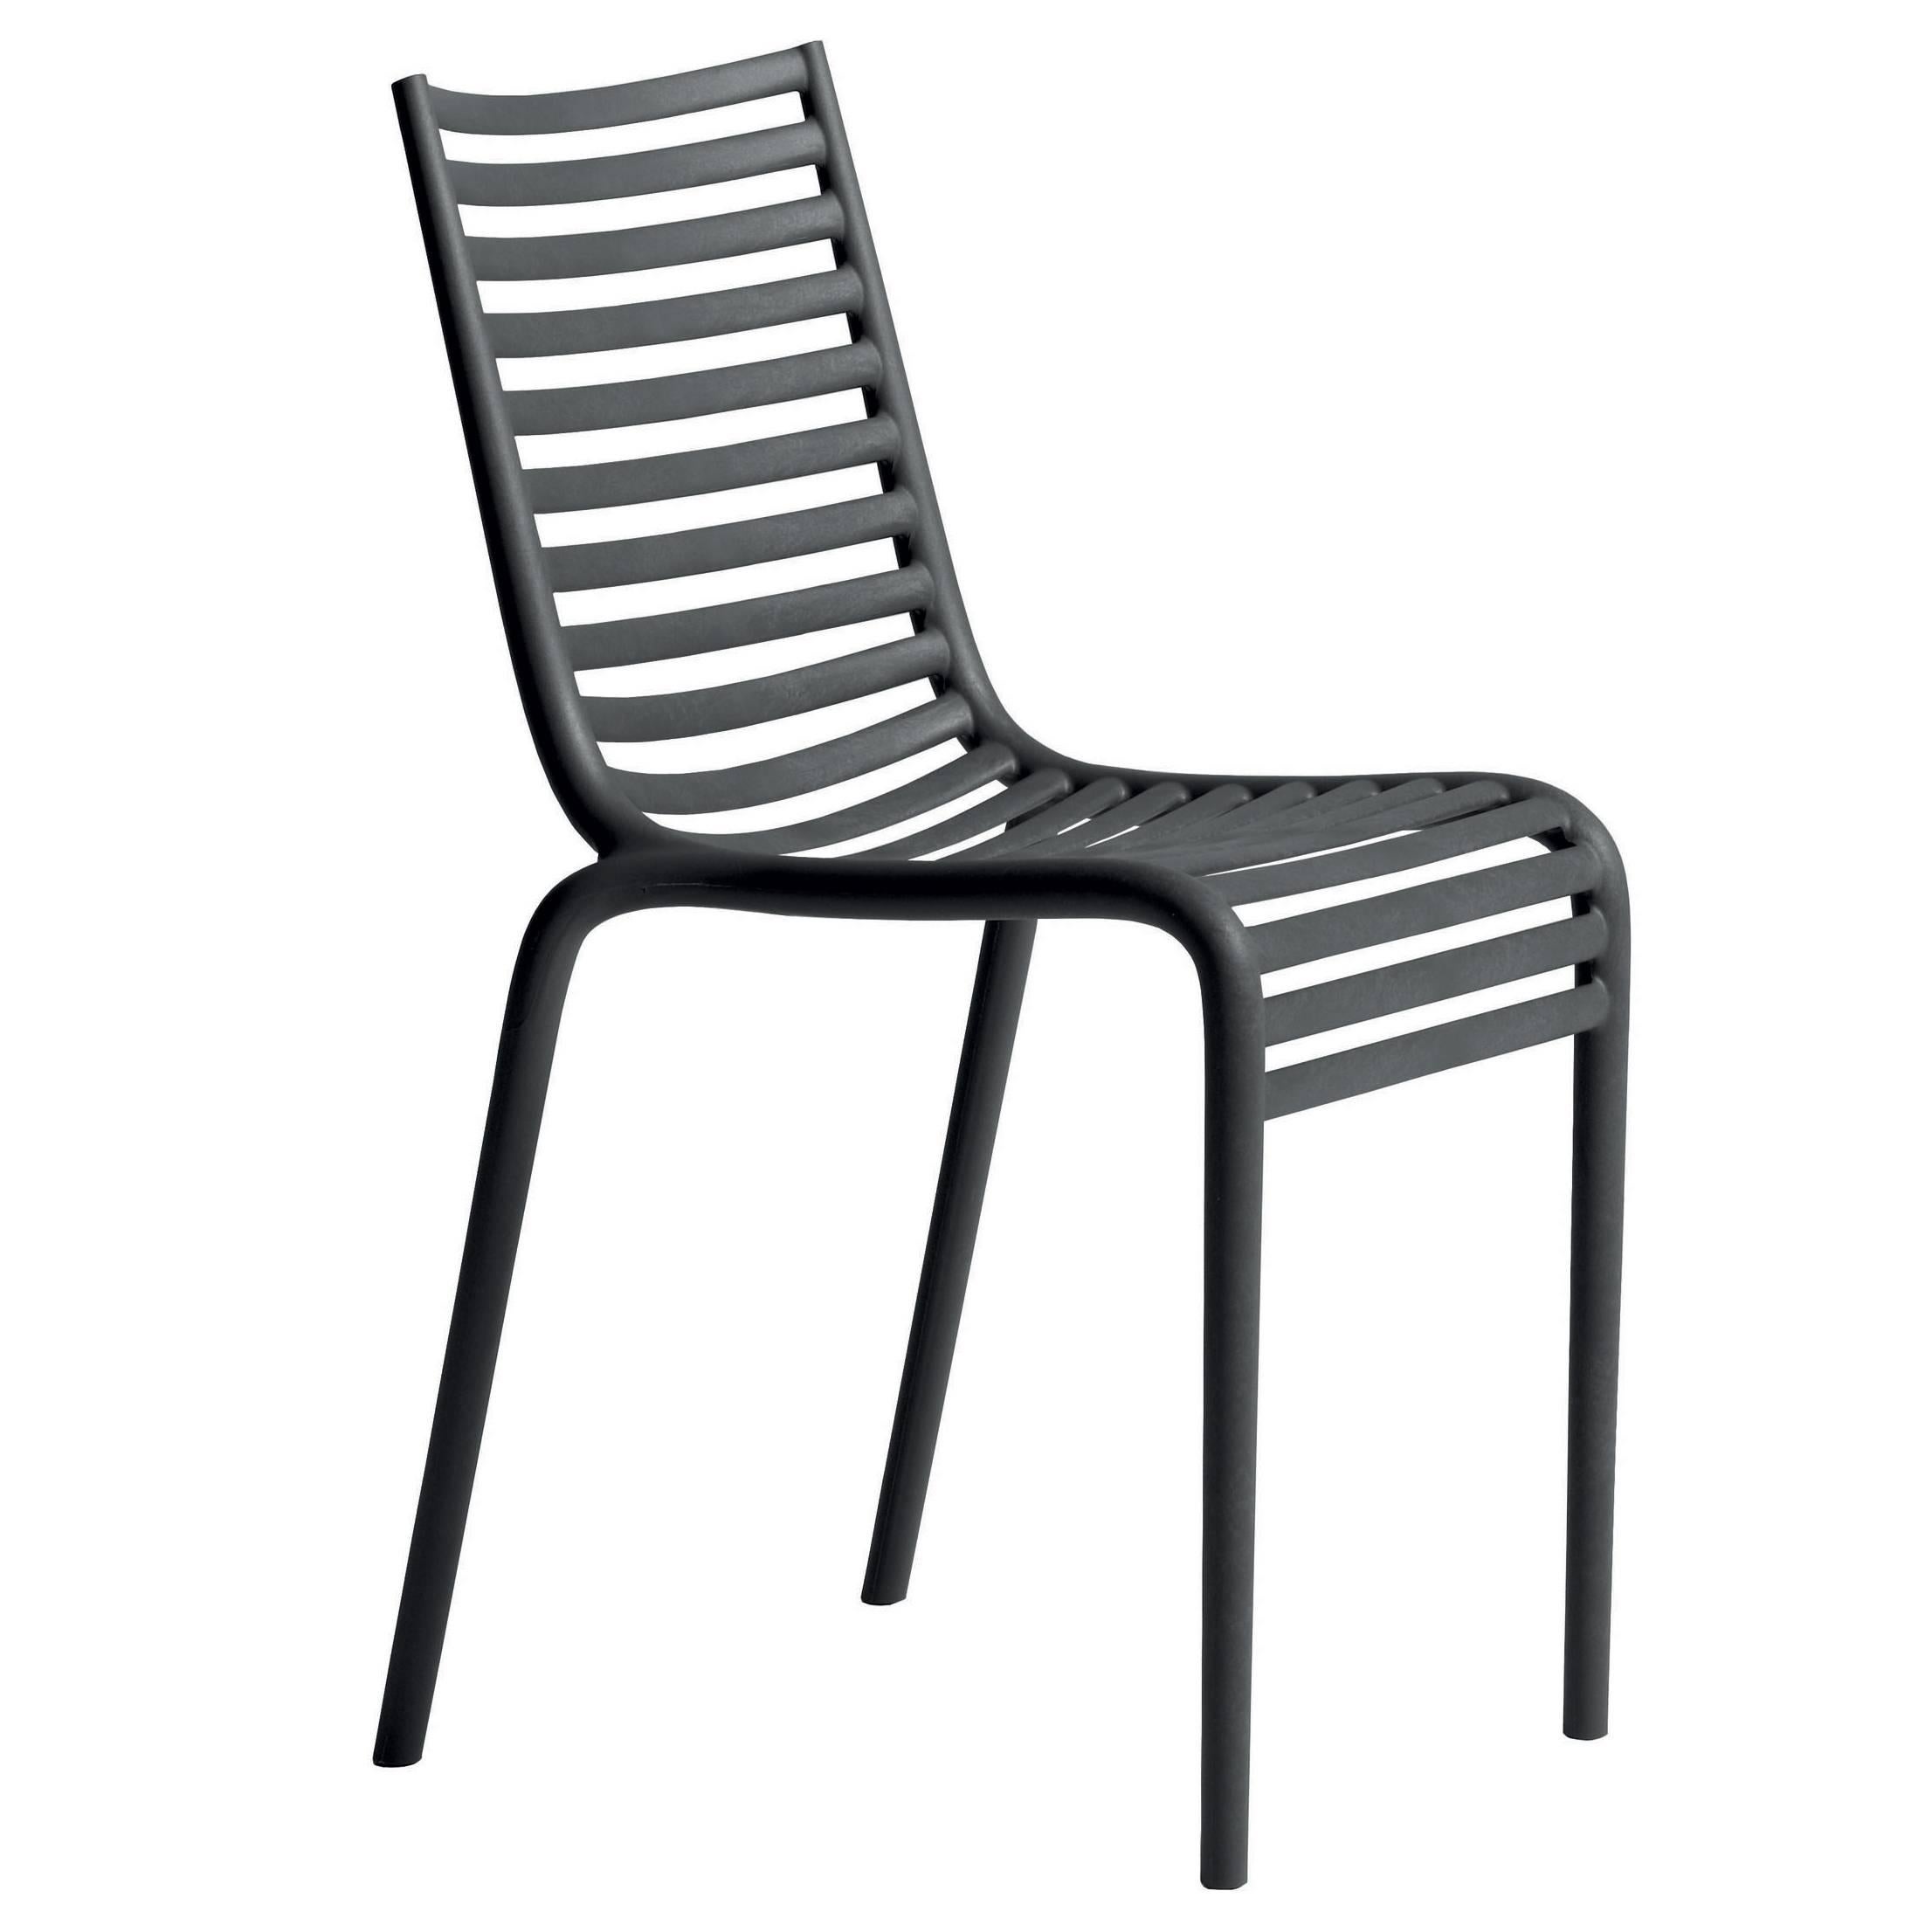 "PIP-e" Stackable Outdoor Chair Designed by Philippe Starck for Driade